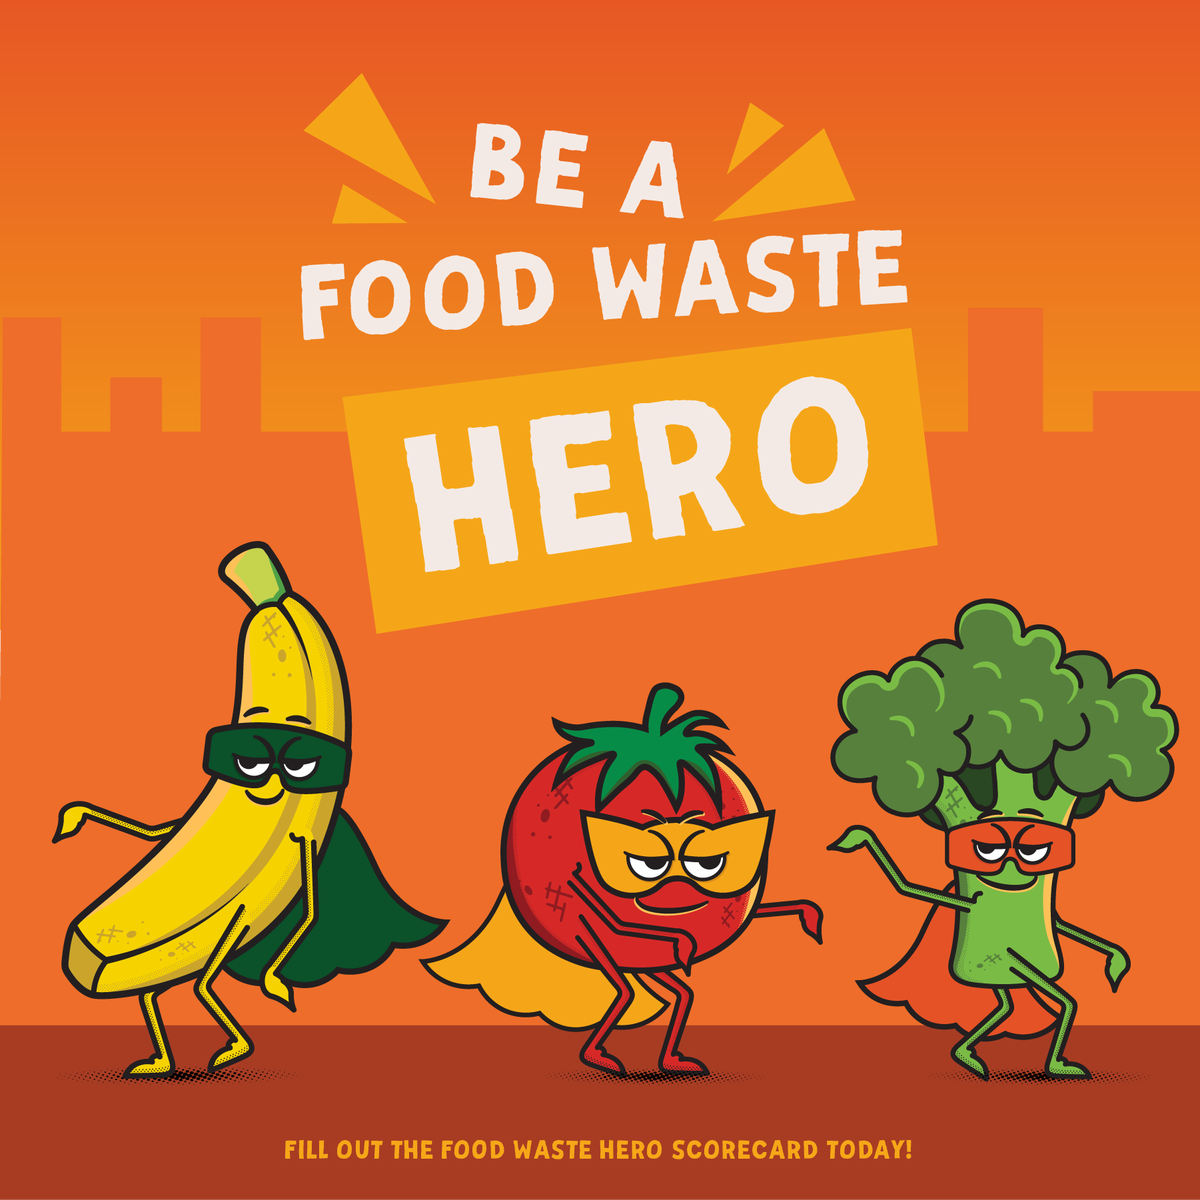 ClearCOGS is proud to be part of the @FoodWastePreventionWeek Hero squad, and we want you to join us. We help restaurants keep perfectly good food out of landfills.  🌱🍽️ 

#FoodWastePreventionWeek #StopFoodWaste #ClearCOGS #HeroSquad #BeAFoodWasteHero #FWPW @savethefoodweek